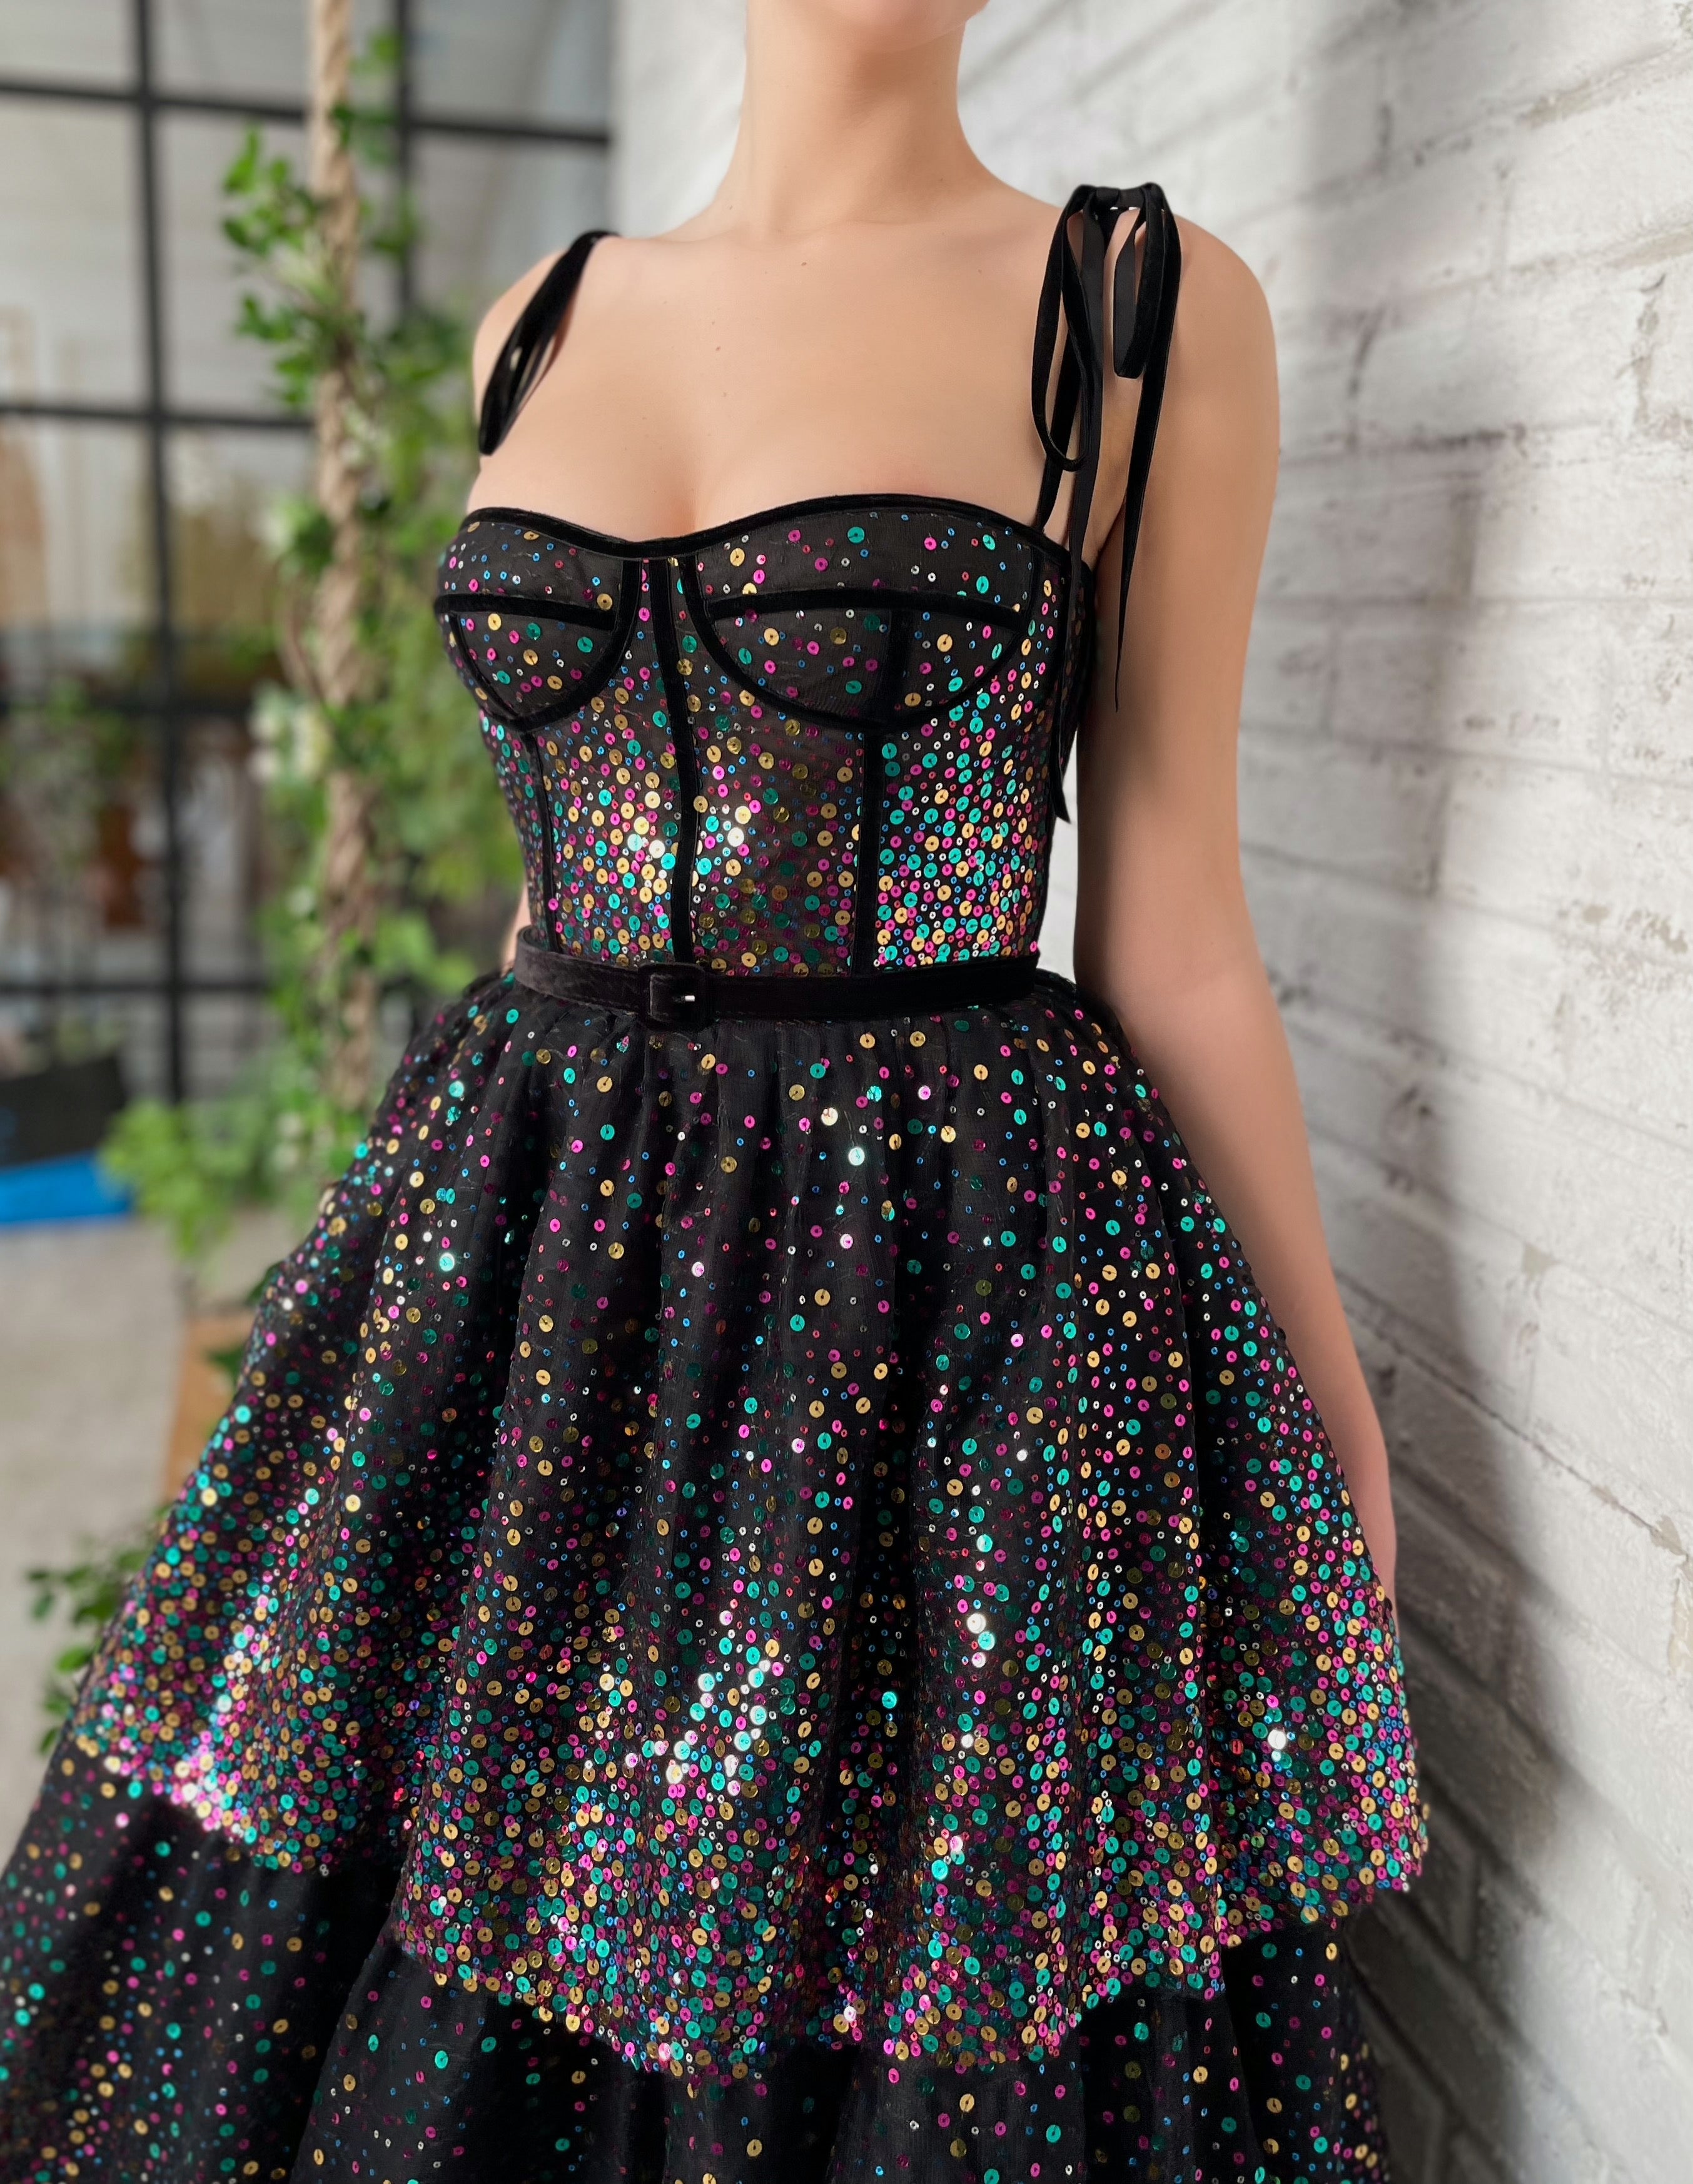 Black midi dress with sequins and spaghetti straps